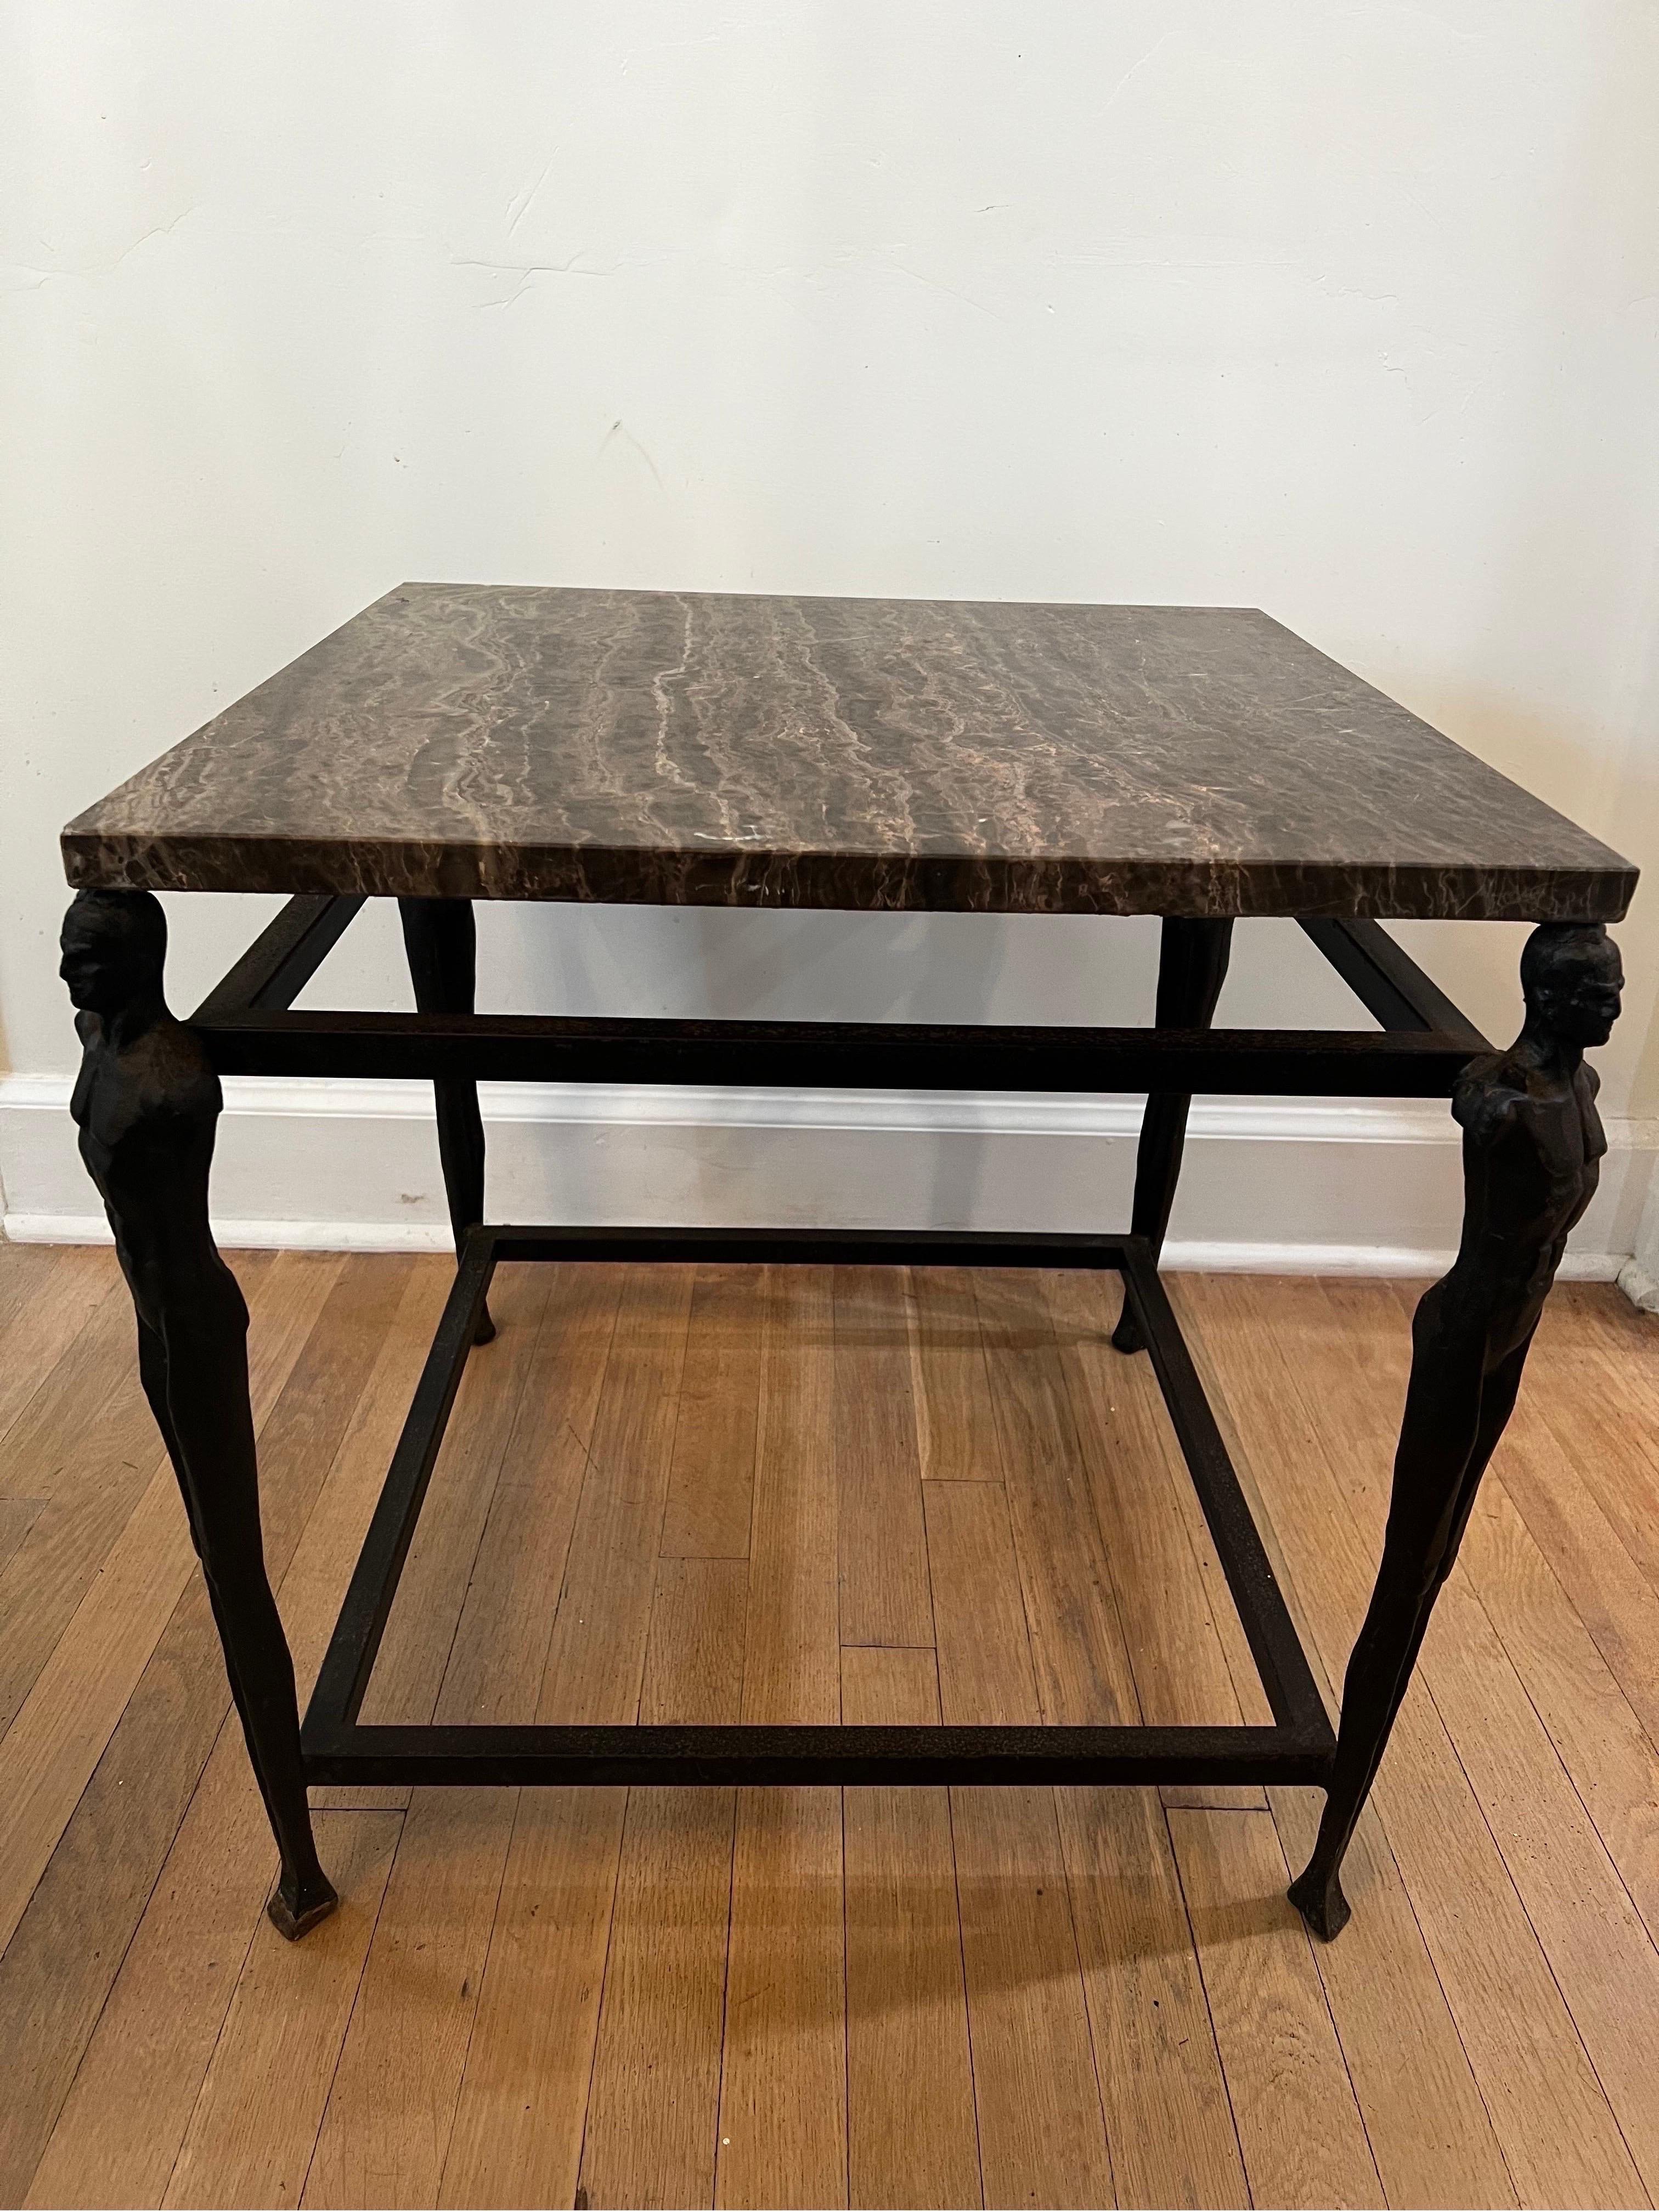 Unique iron side table with 4 figurative/male body figurines at each leg in the style of Giacometti. 
Top is dark rustic colored marble but does have heavy scratching and should probably be replaced.

Table is solid and heavy.  Bronze colored Iron